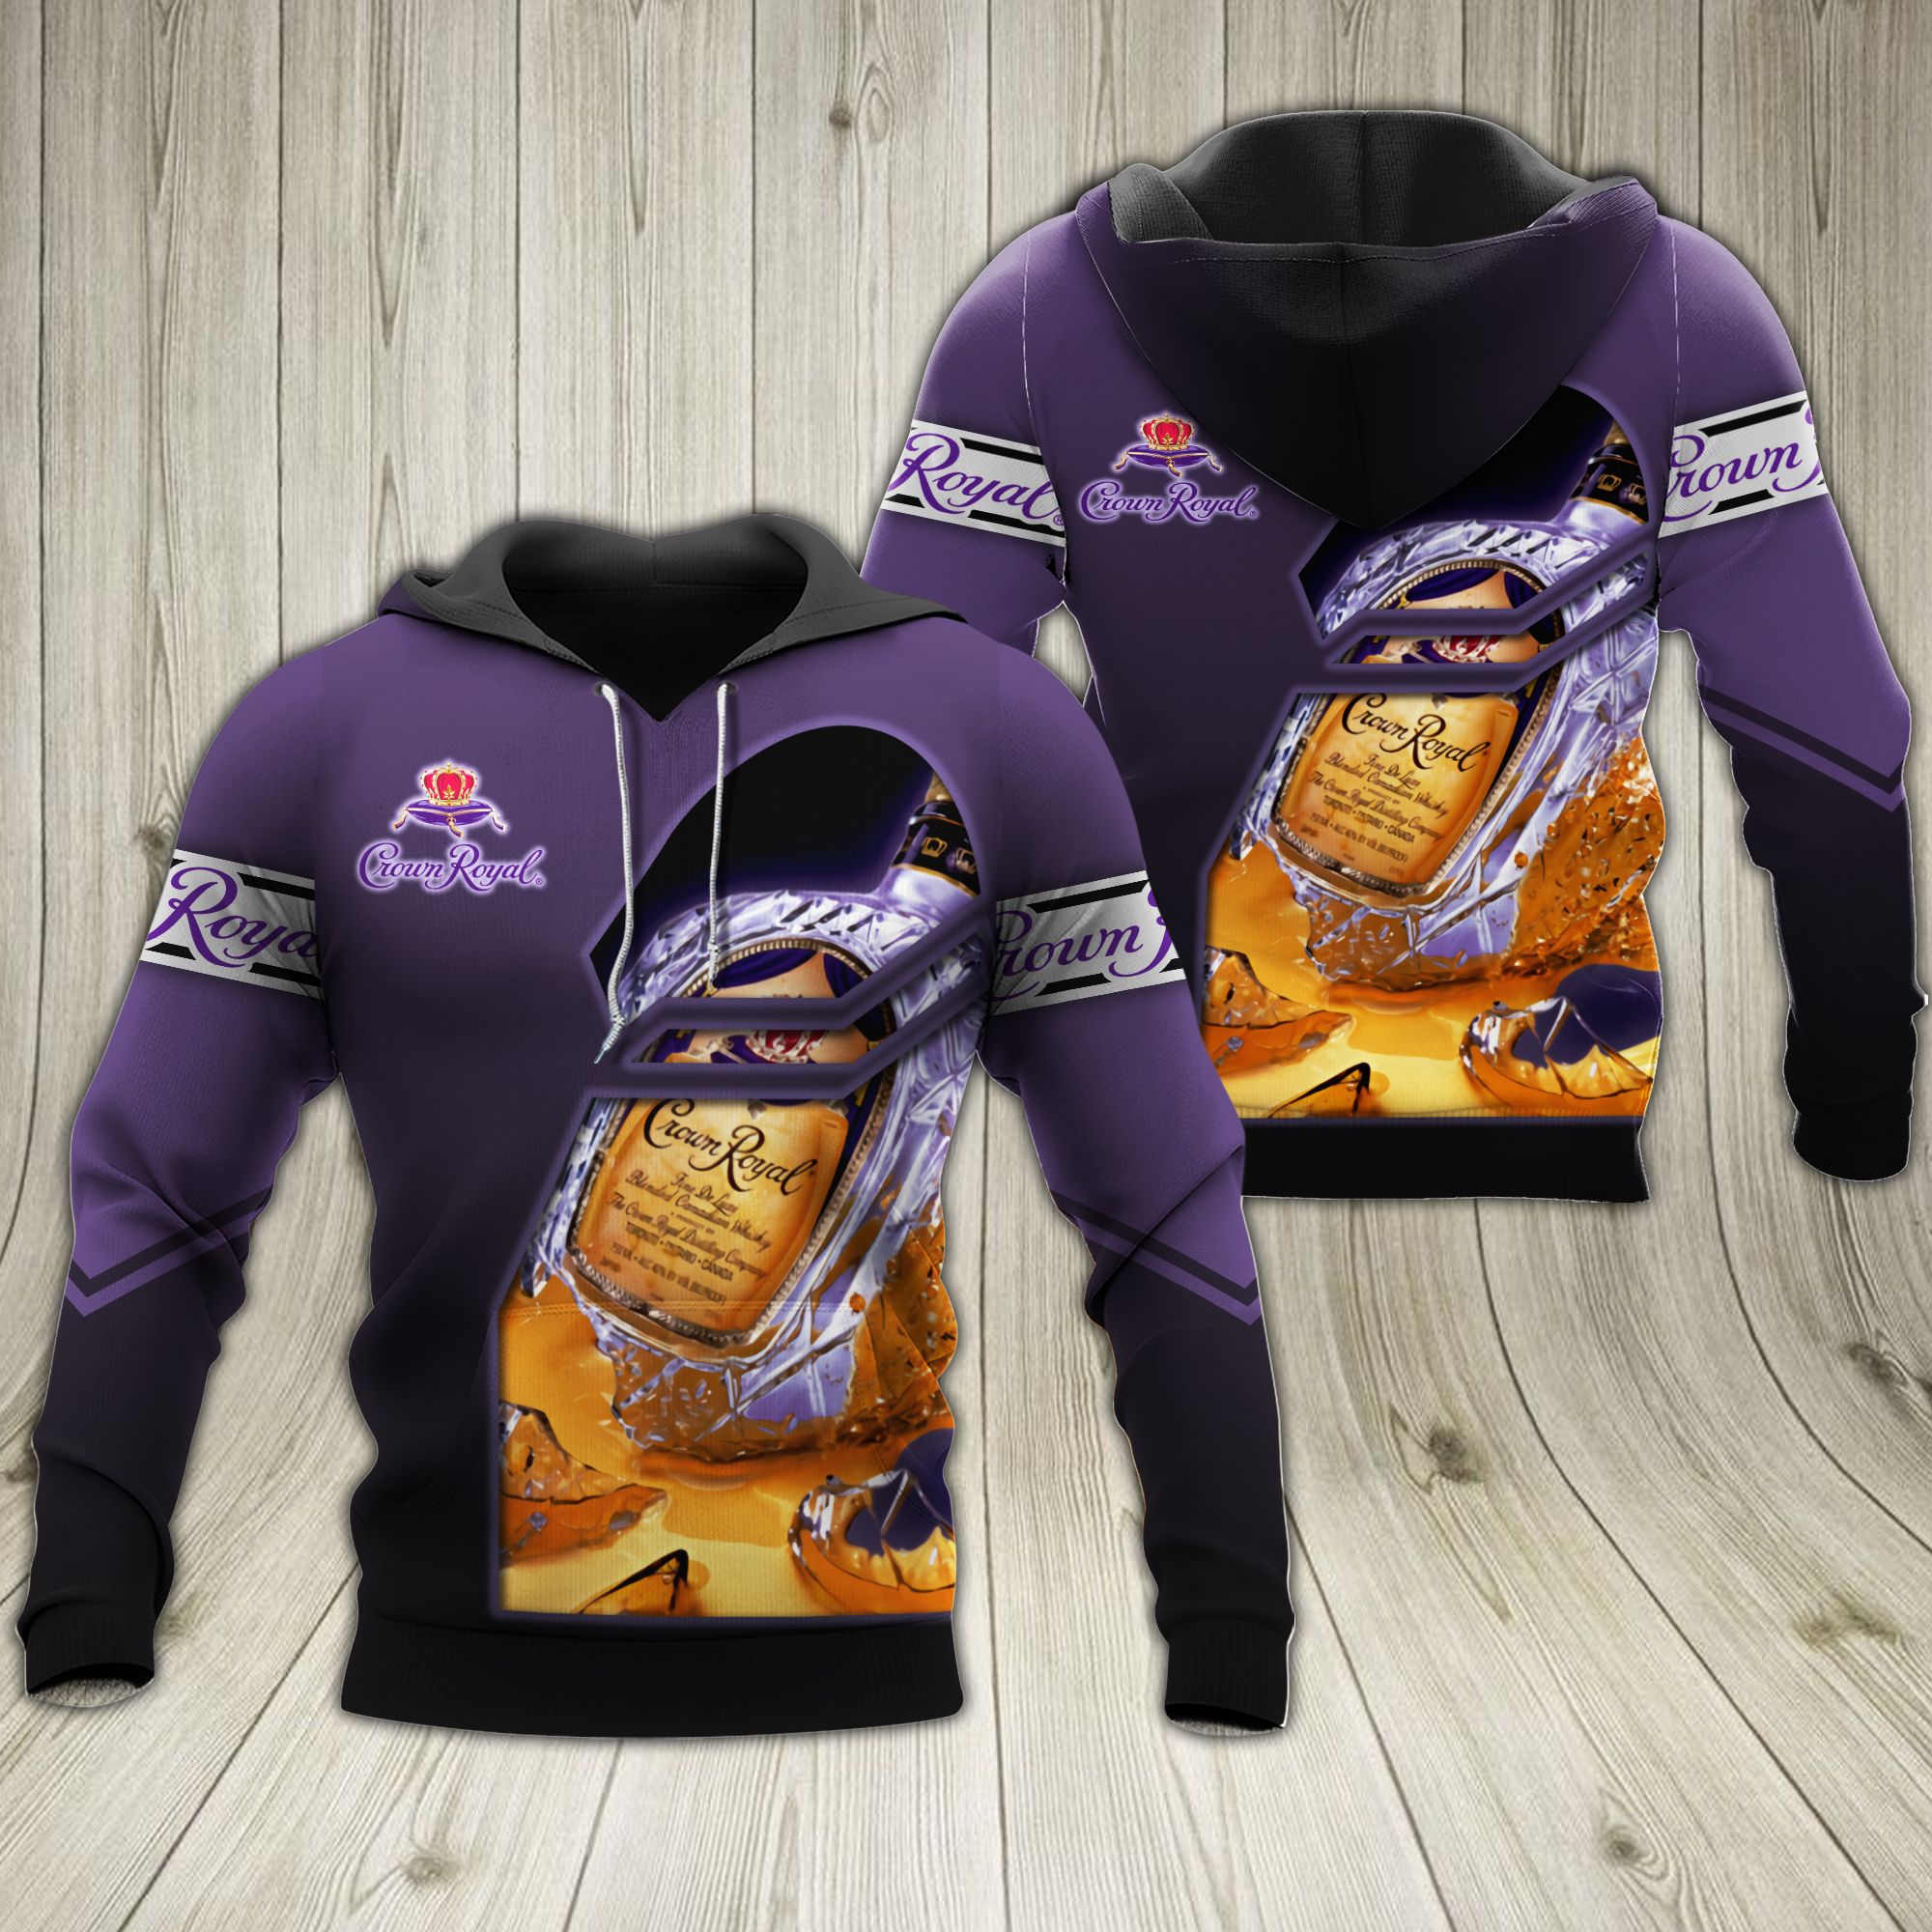 Dory Crown Royal Peach I'm never drinking again 3d hoodie 4